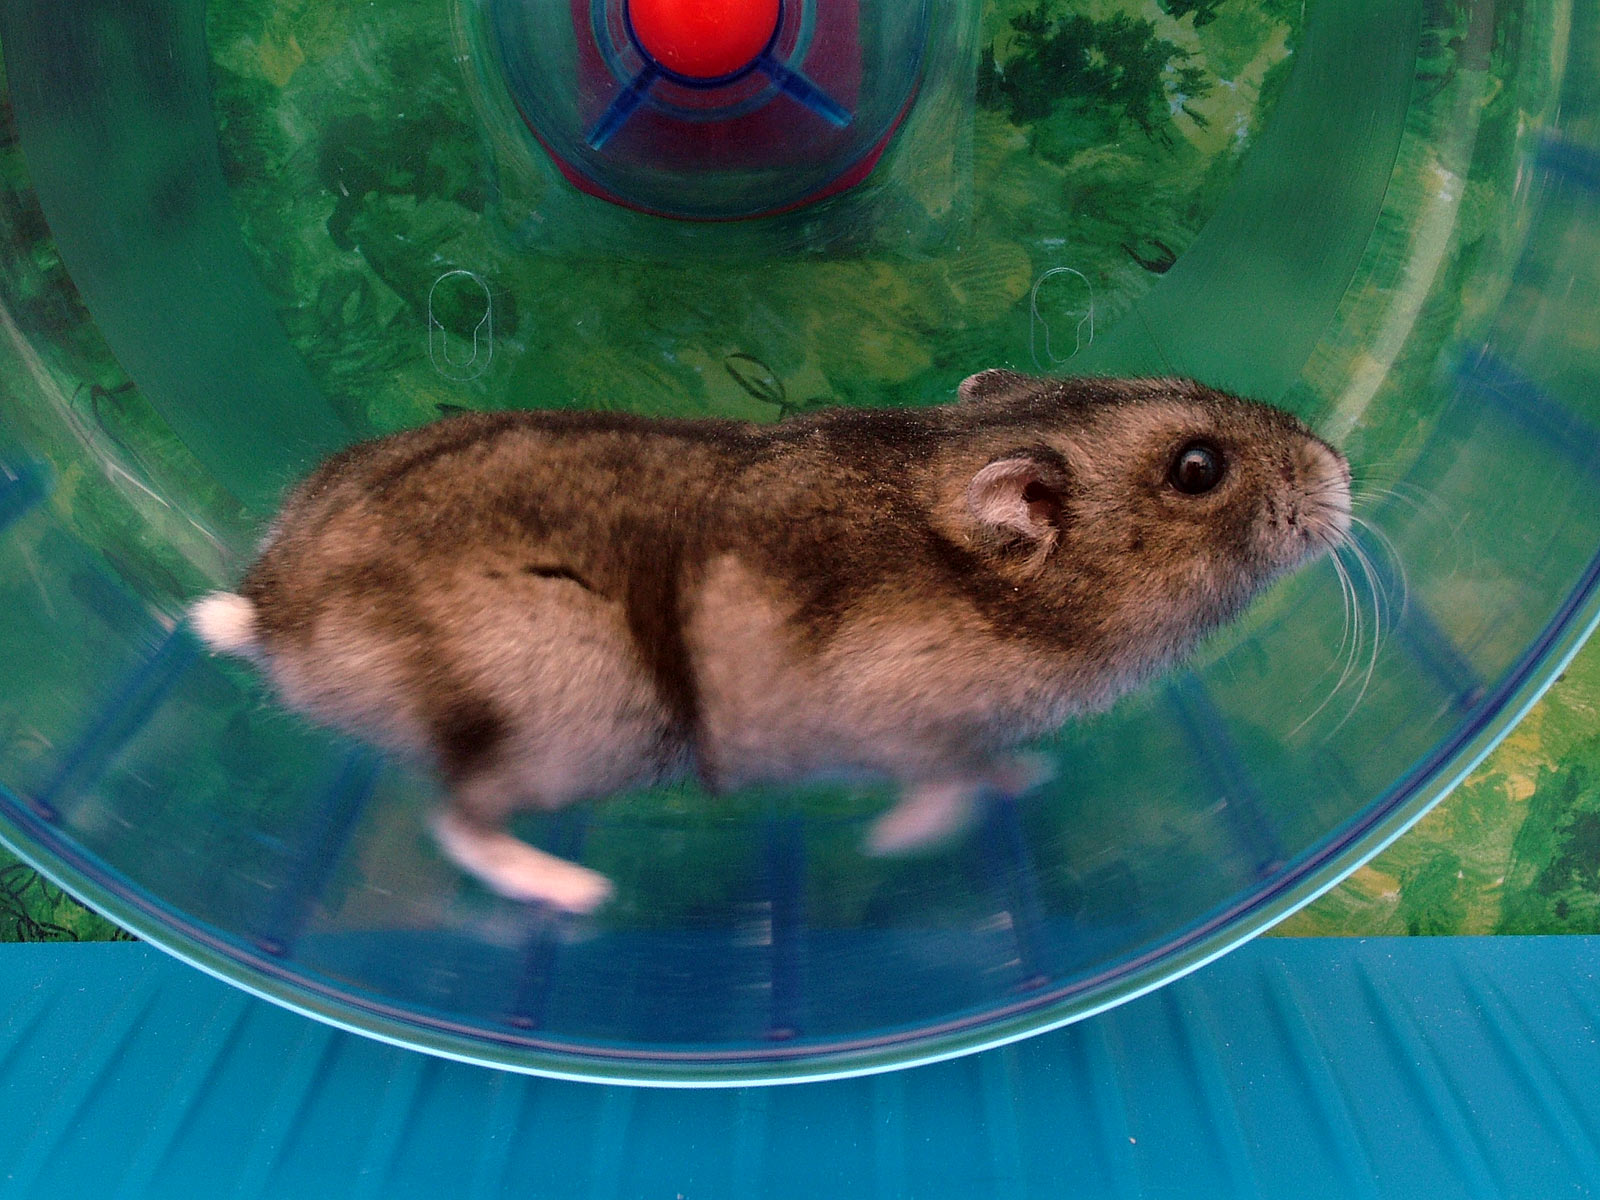 Hamster in a wheel, running just cuz it's fun. Maybe.